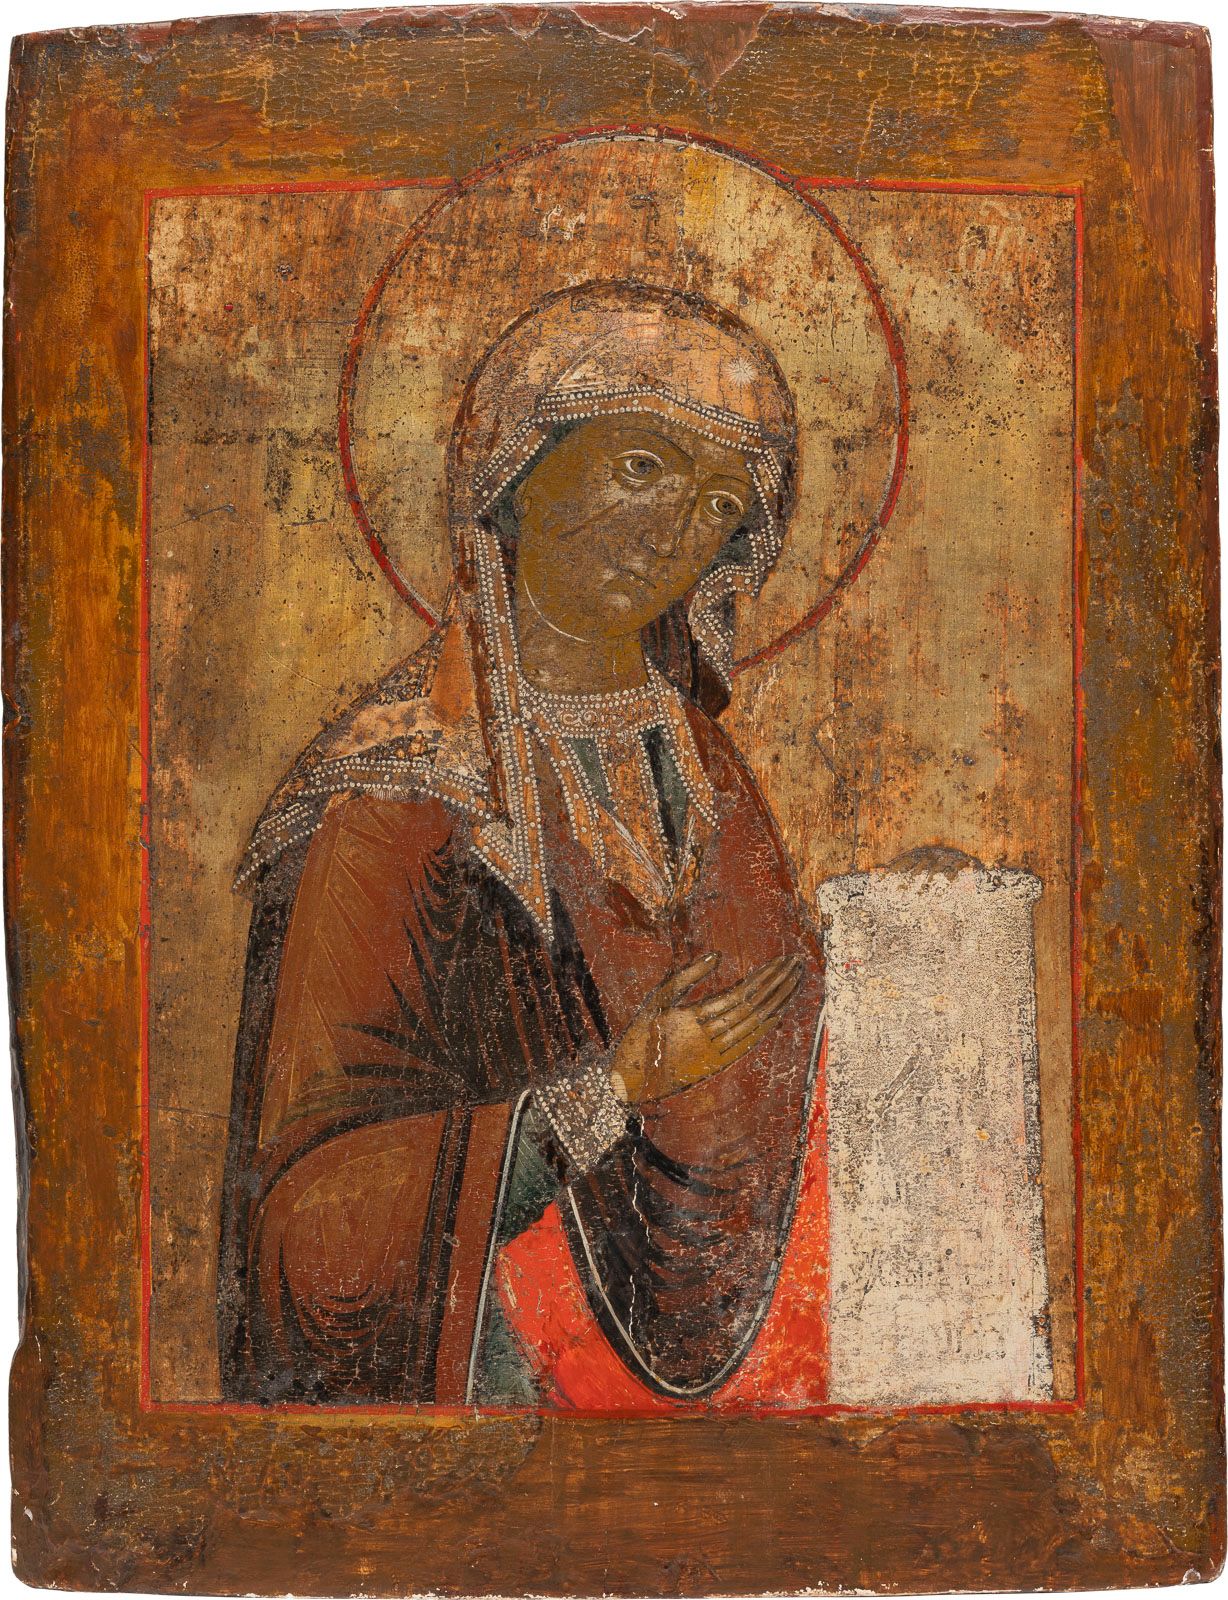 A LARGE ICON SHOWING THE MOTHER OF GOD FROM A DEISIS GROSSE IKONE, DIE DIE MUTTE&hellip;